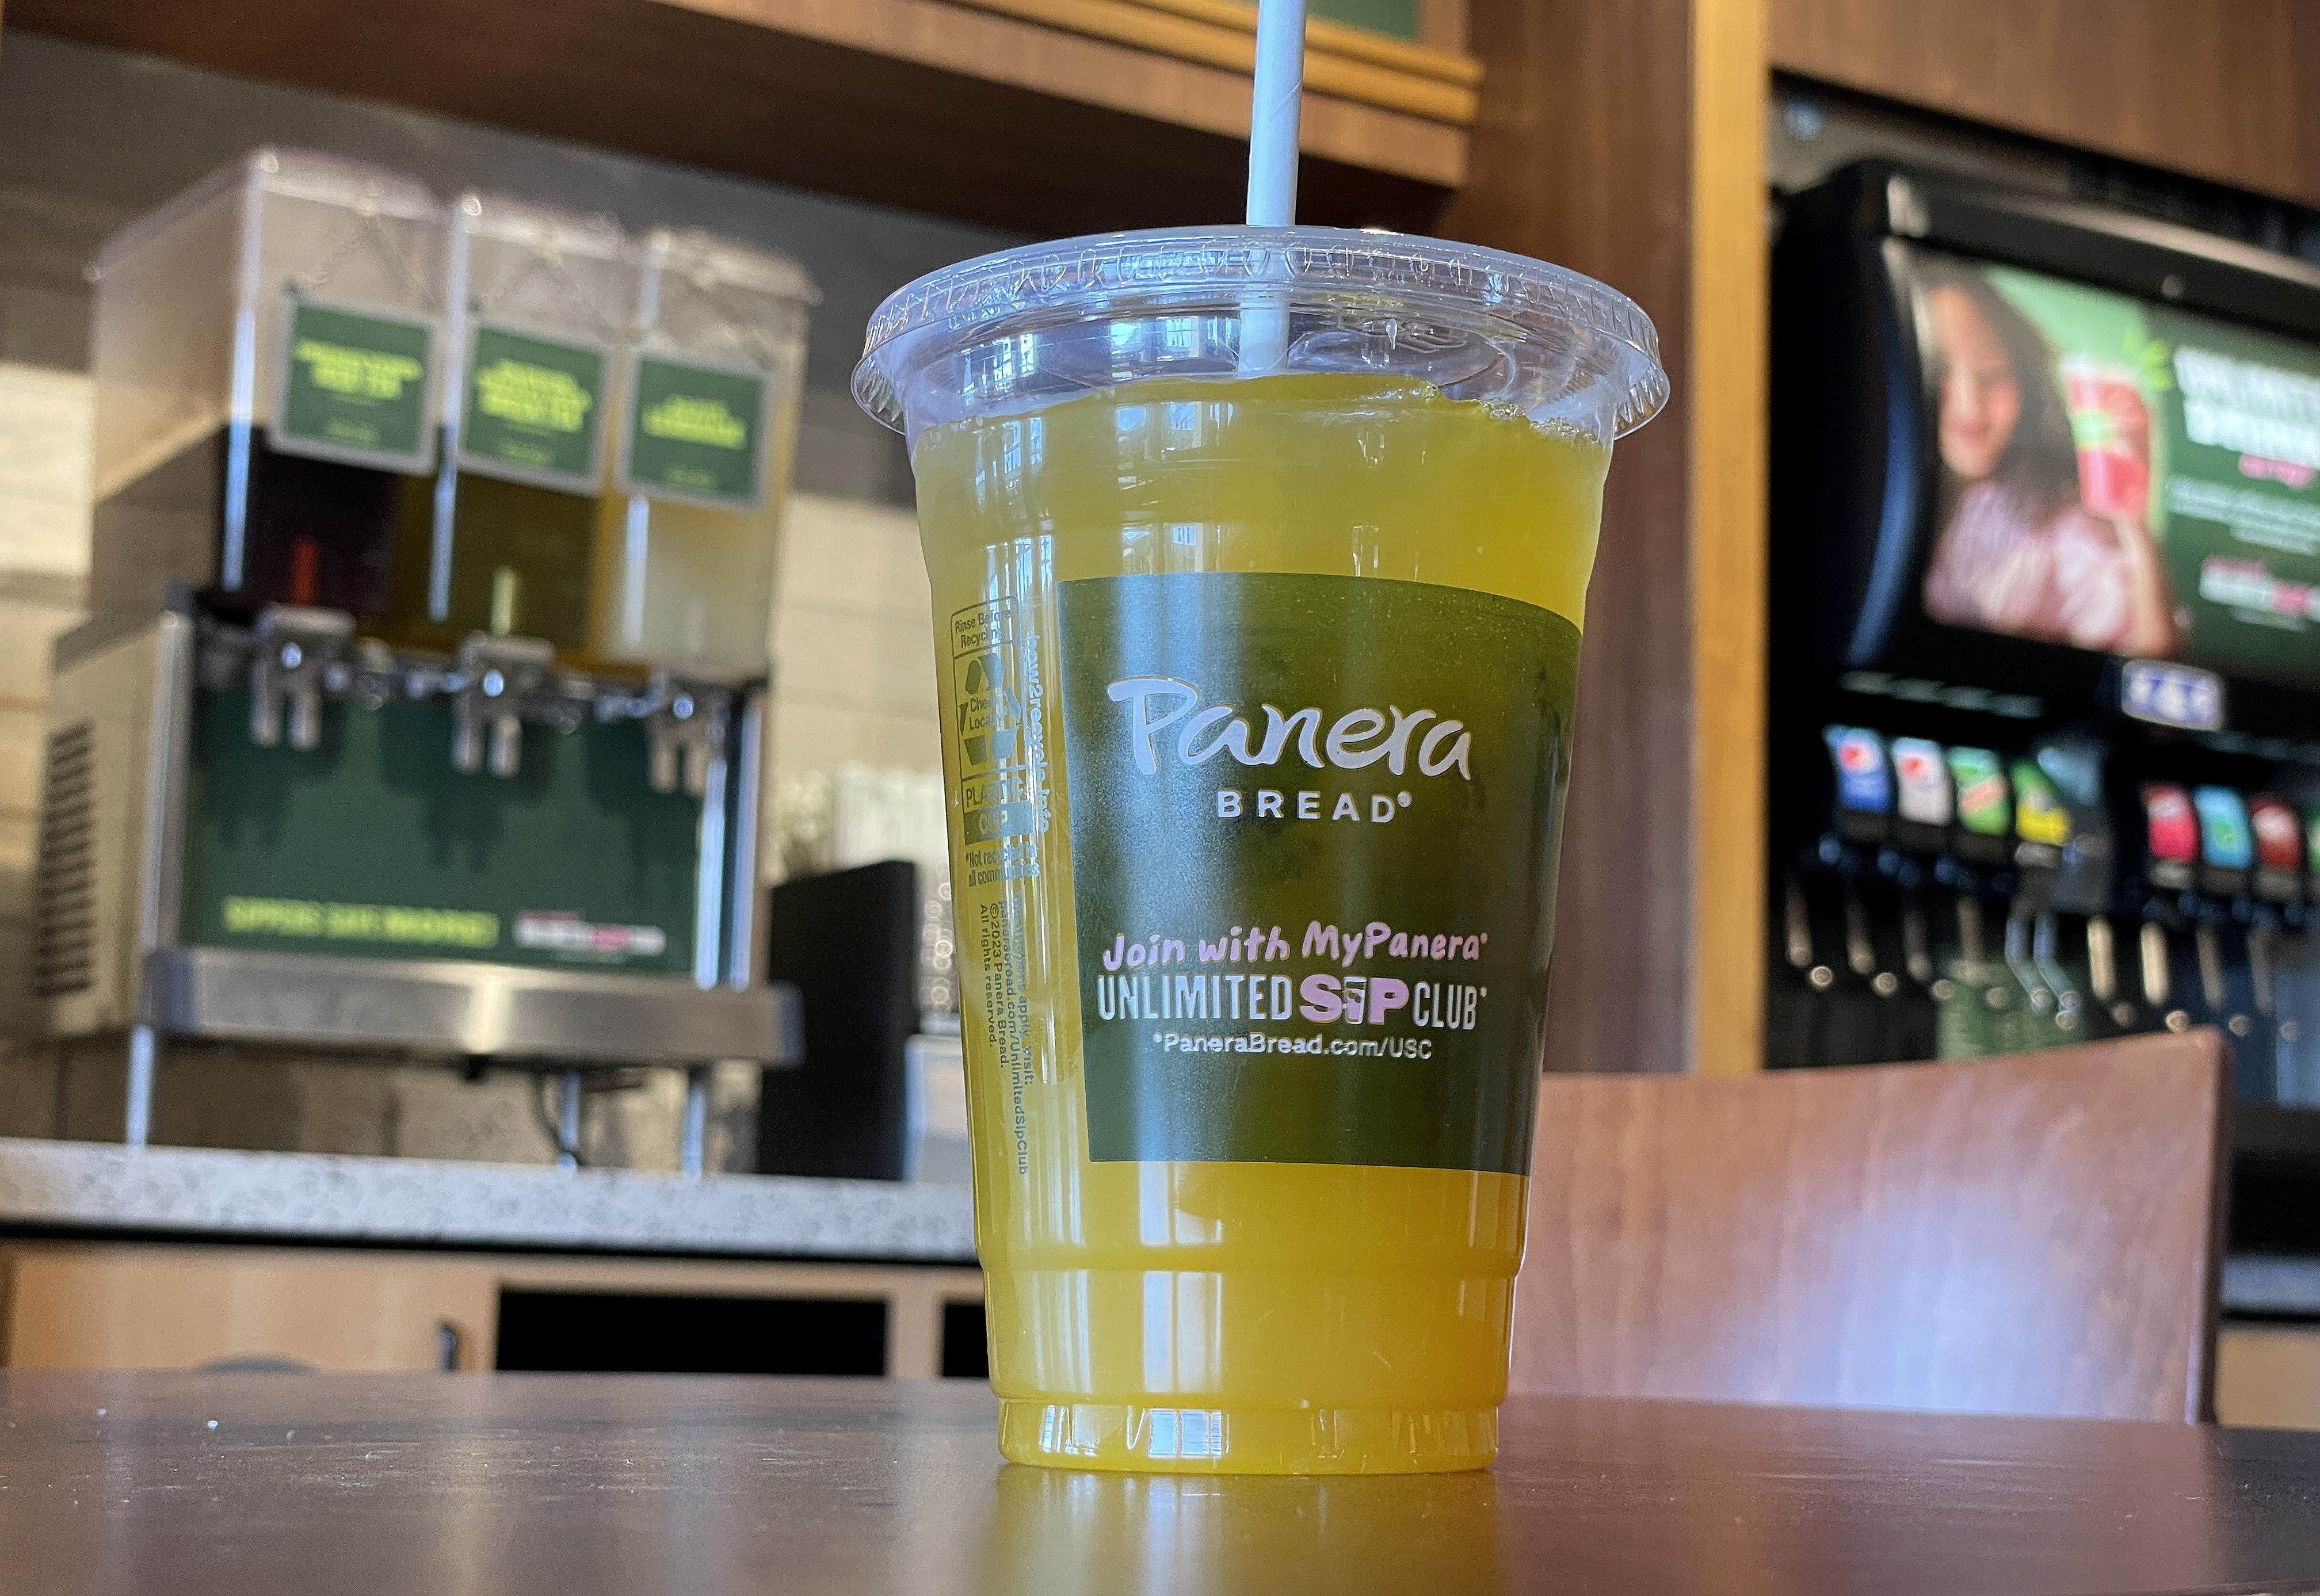 Panera discontinues Charged Sips, the drinks at the center of several wrongful death lawsuits